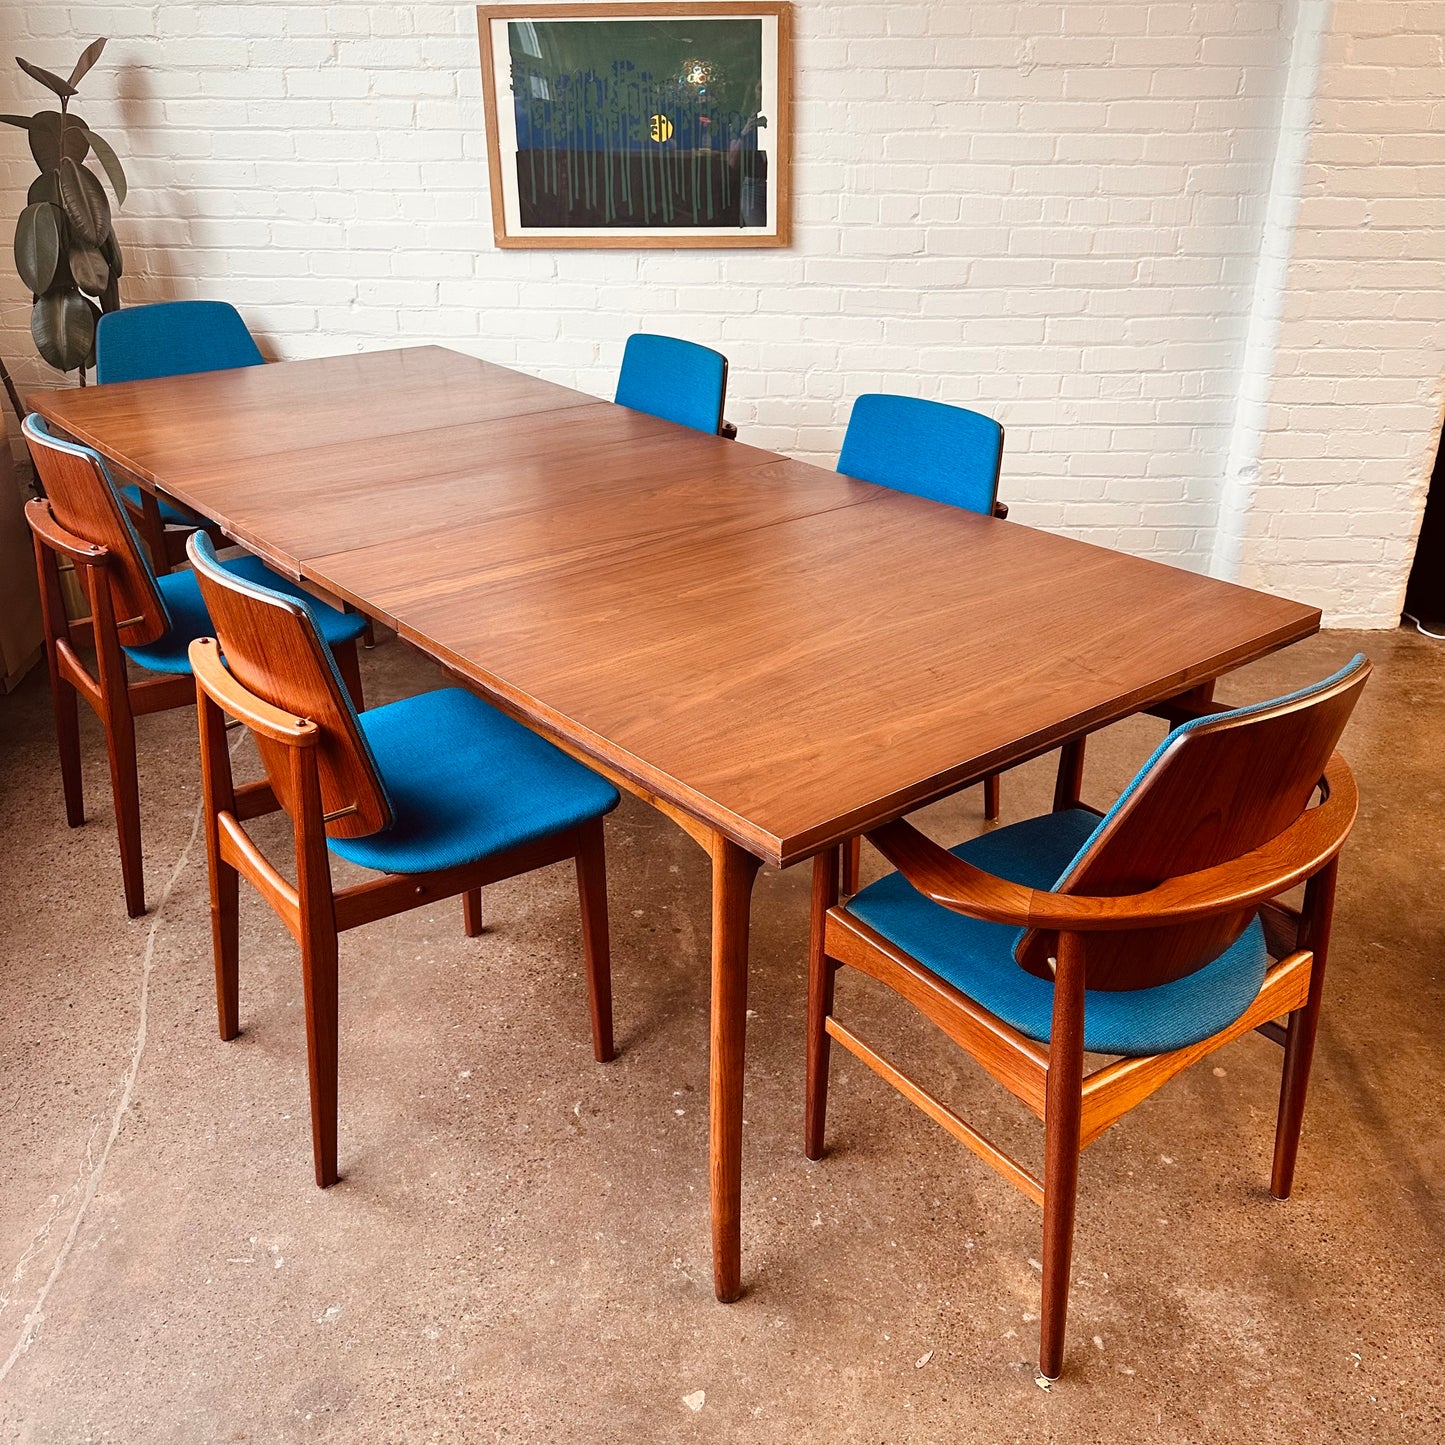 MCM WALNUT DINING TABLE WITH THREE LEAVES